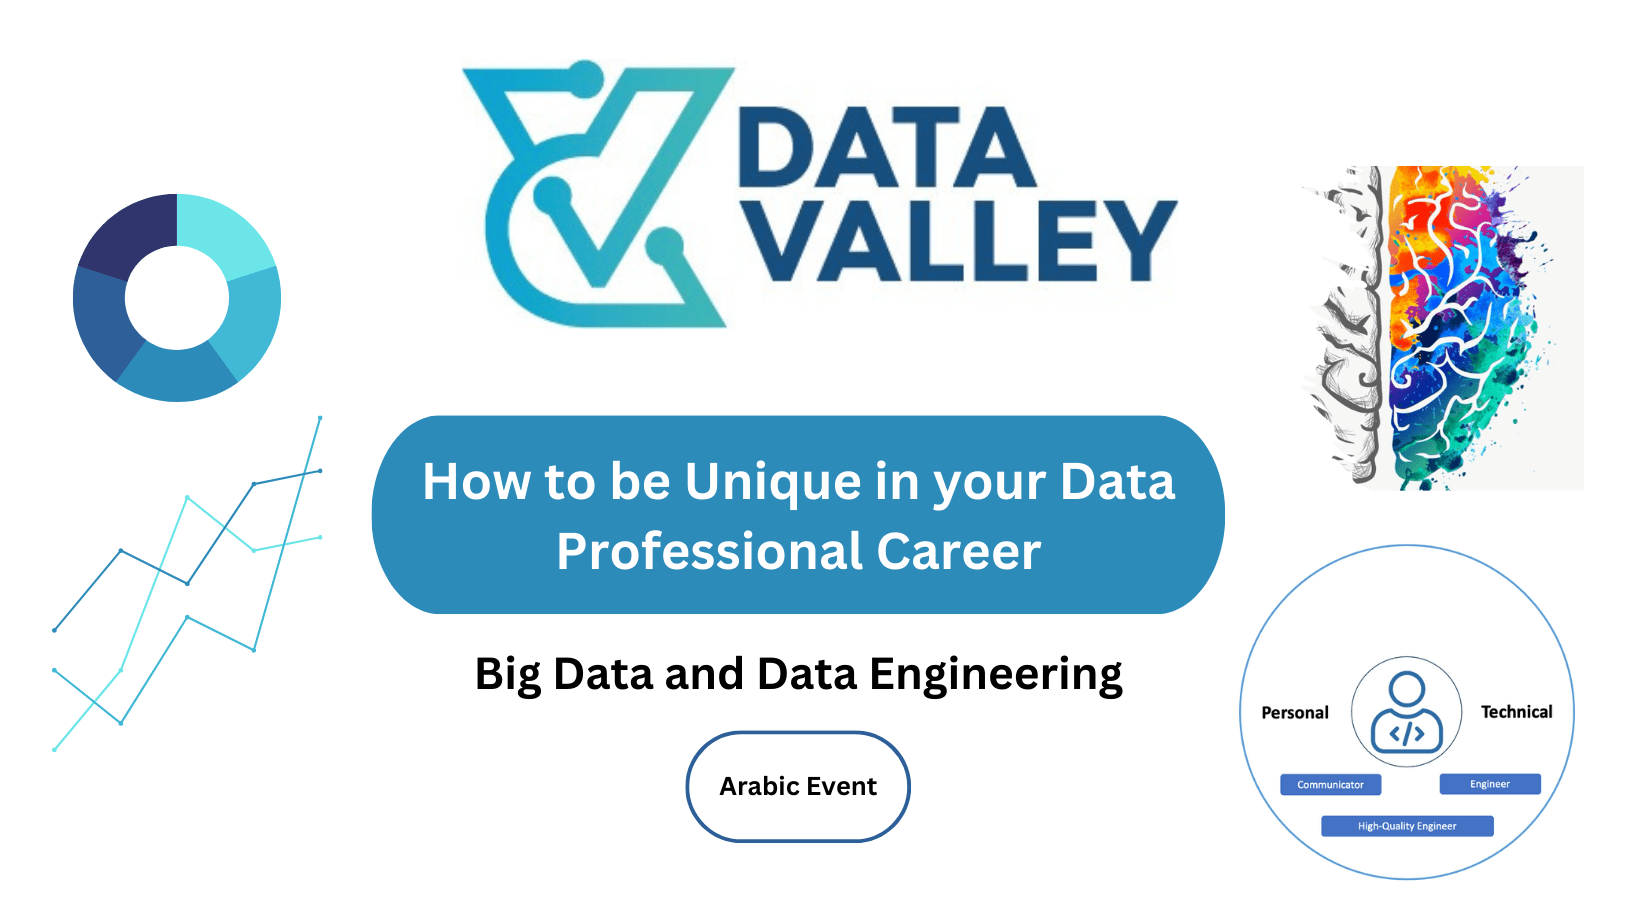 How to be Unique in your Data Career